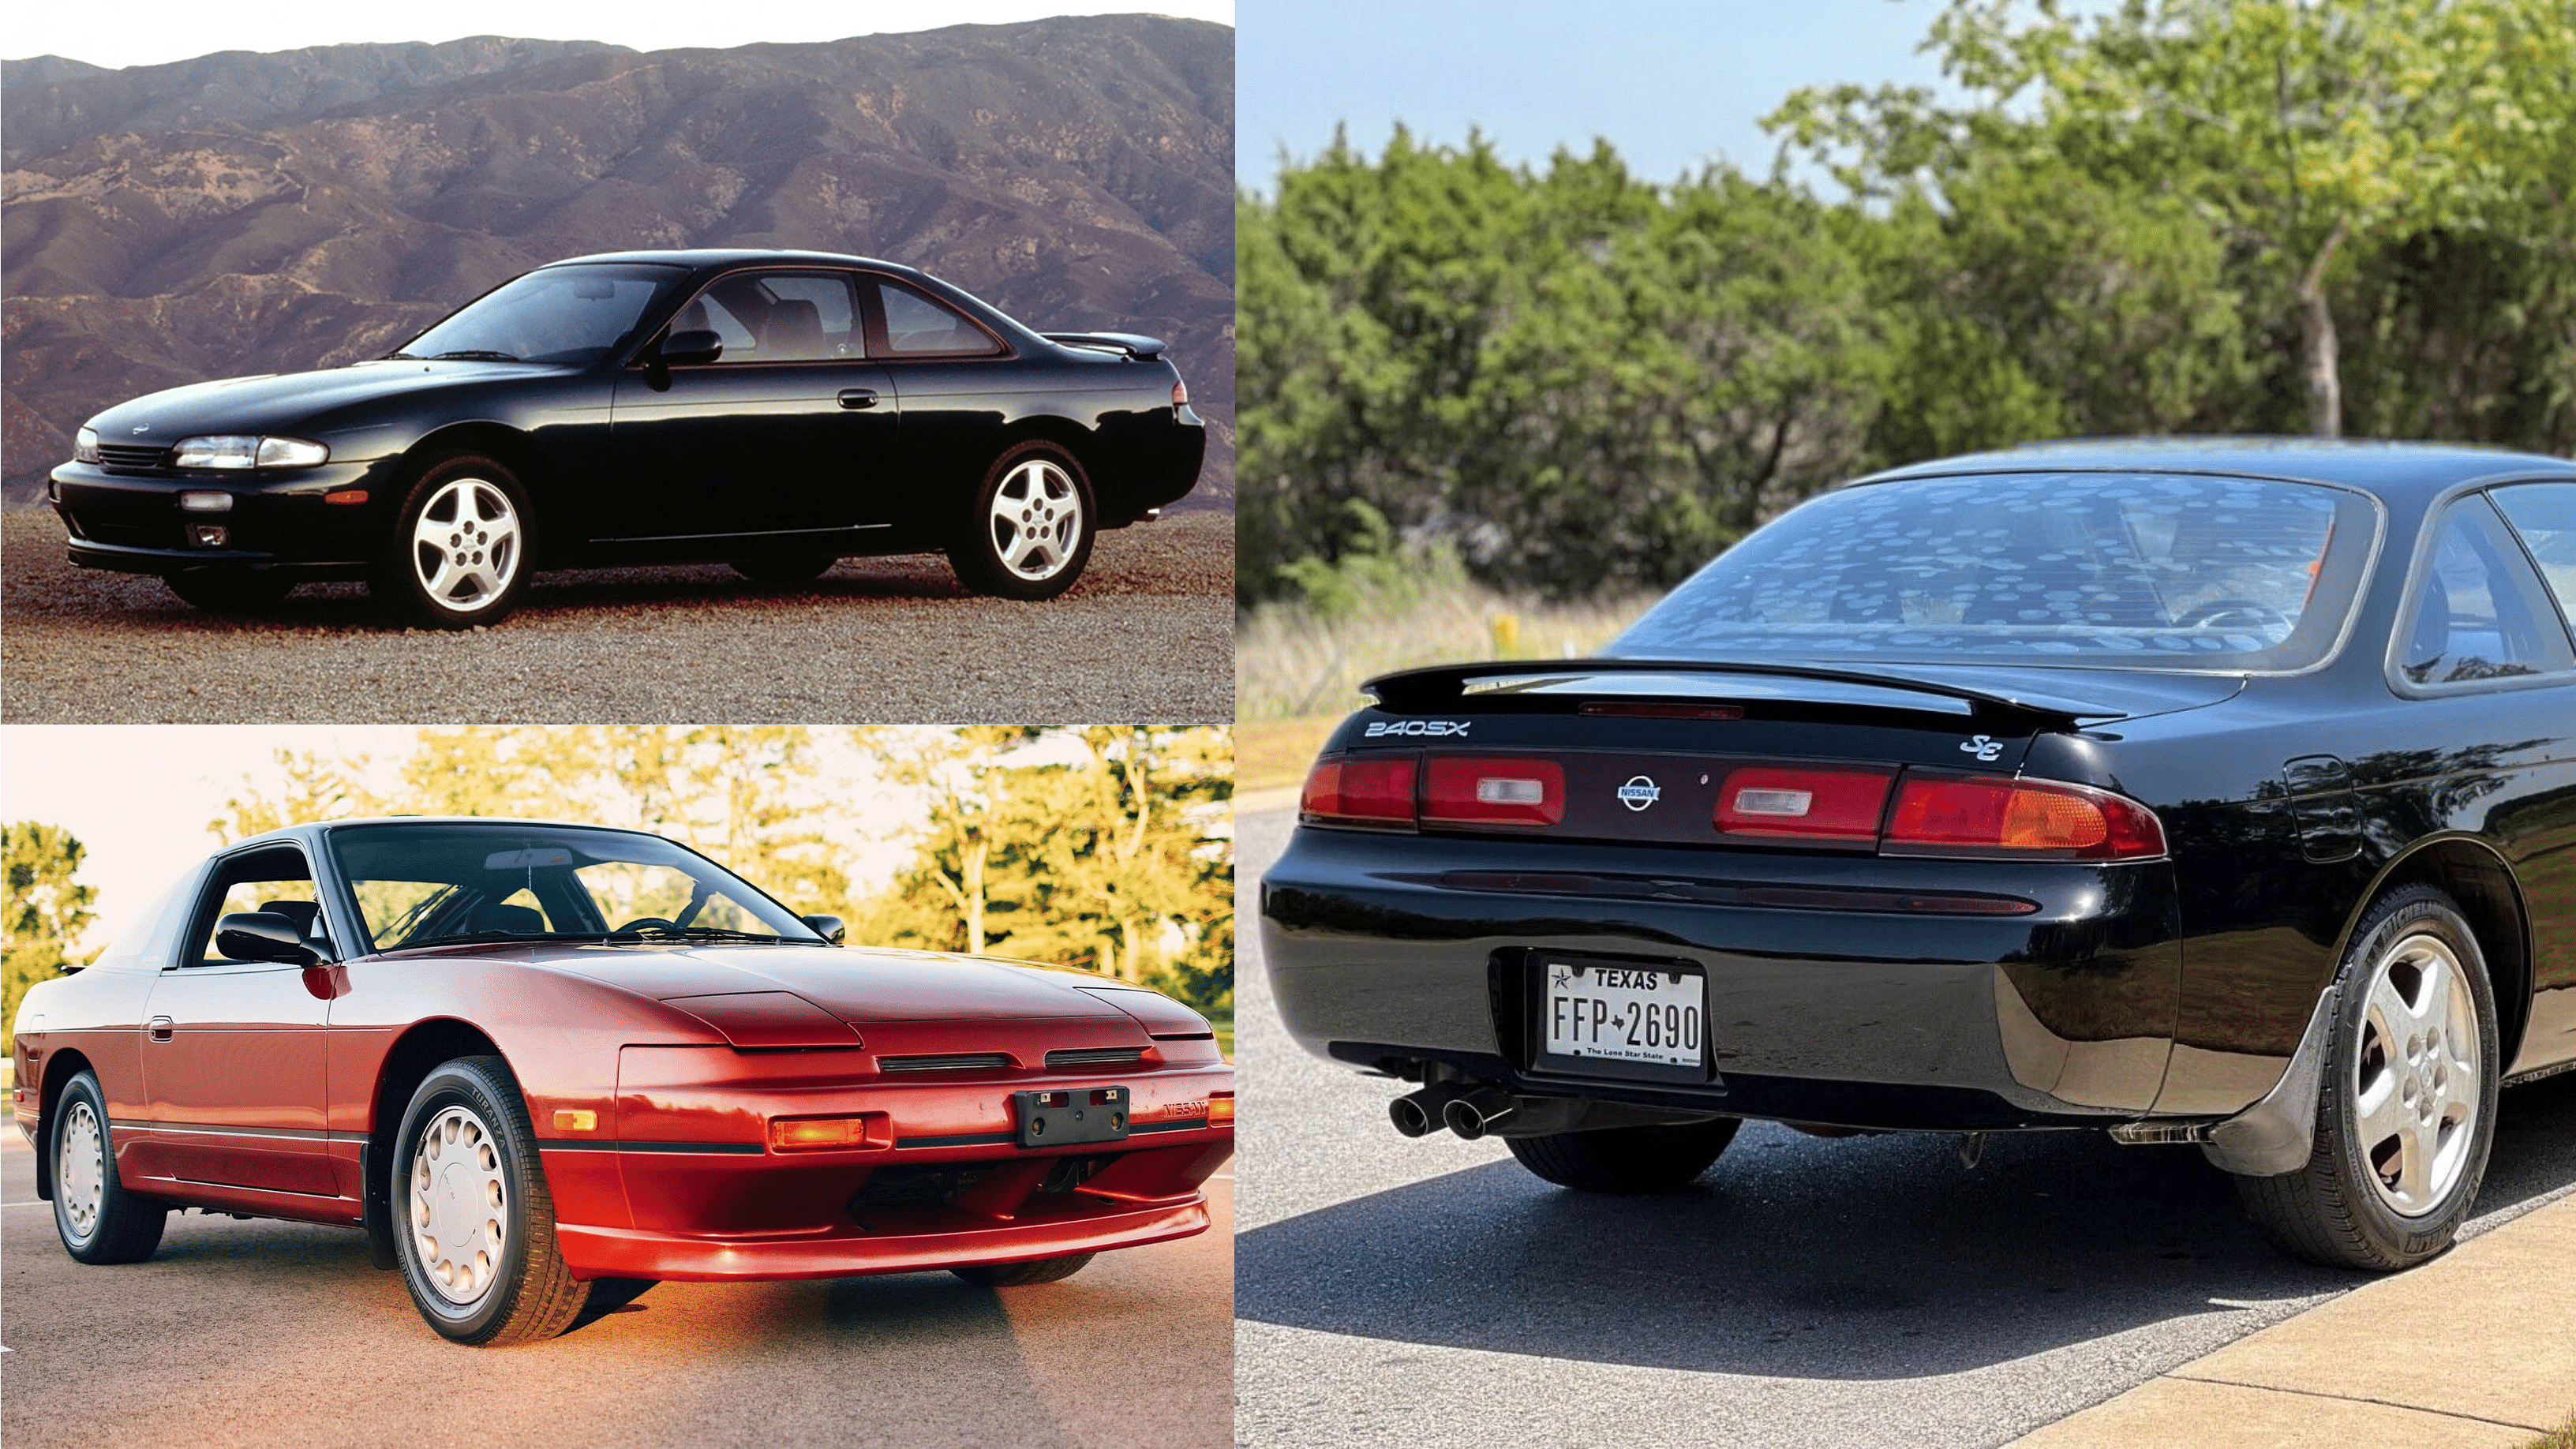 Black Nissan 240SX - side and rear view, Red Nissan 240SX - front view